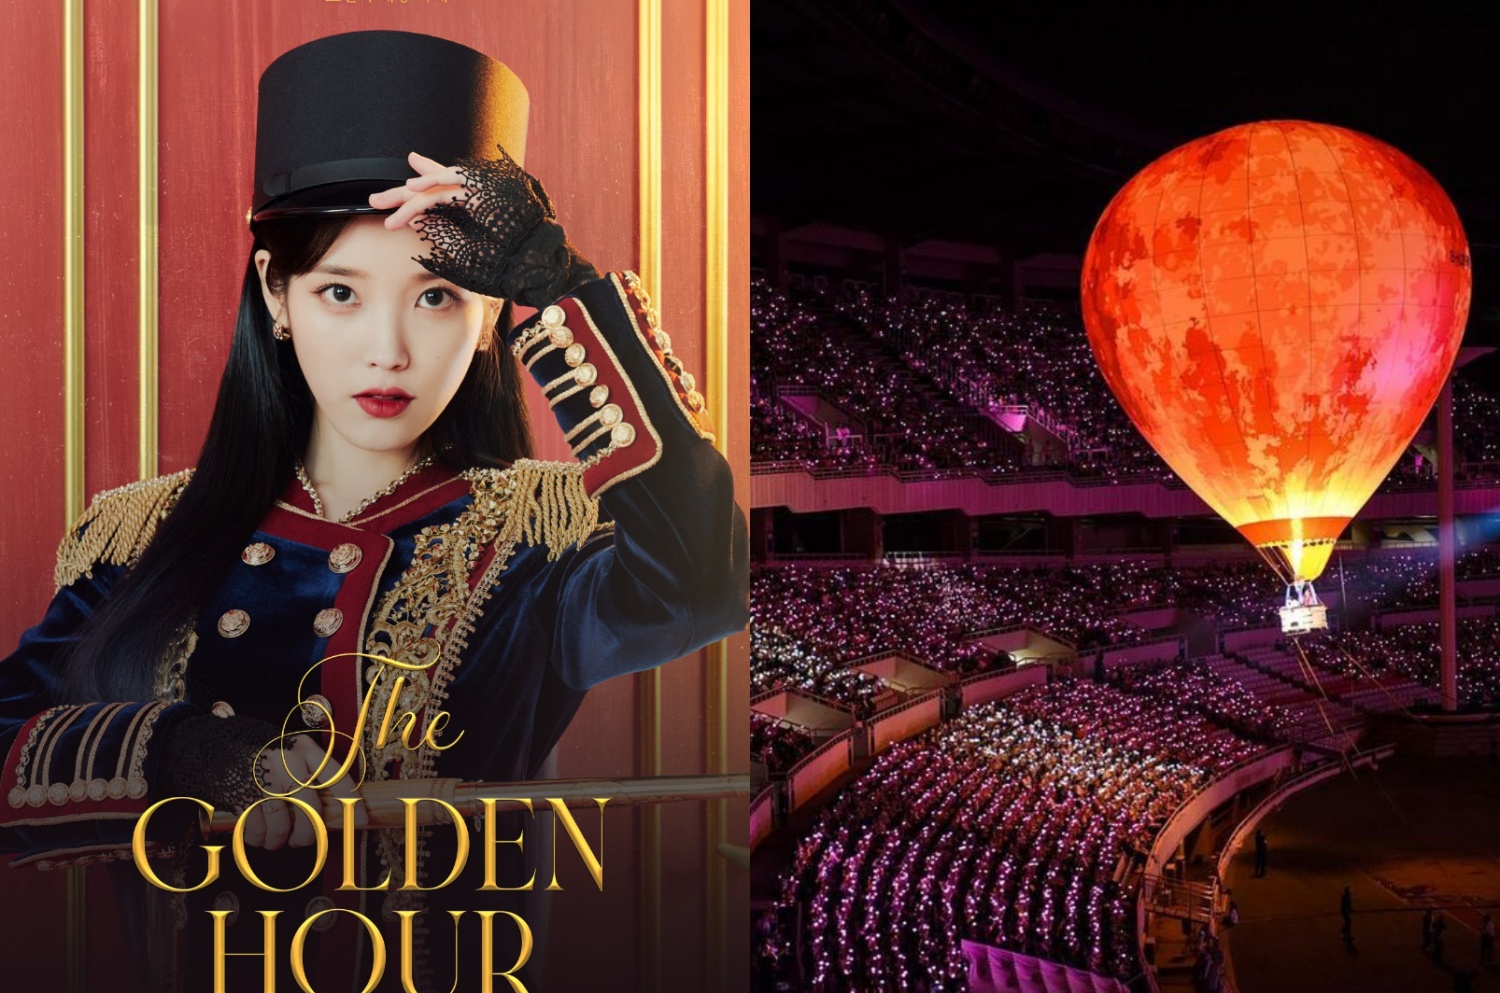 IU reveals it has almost given up organizing “The Golden Hour” concerts at the Olympic Stadium in Seoul